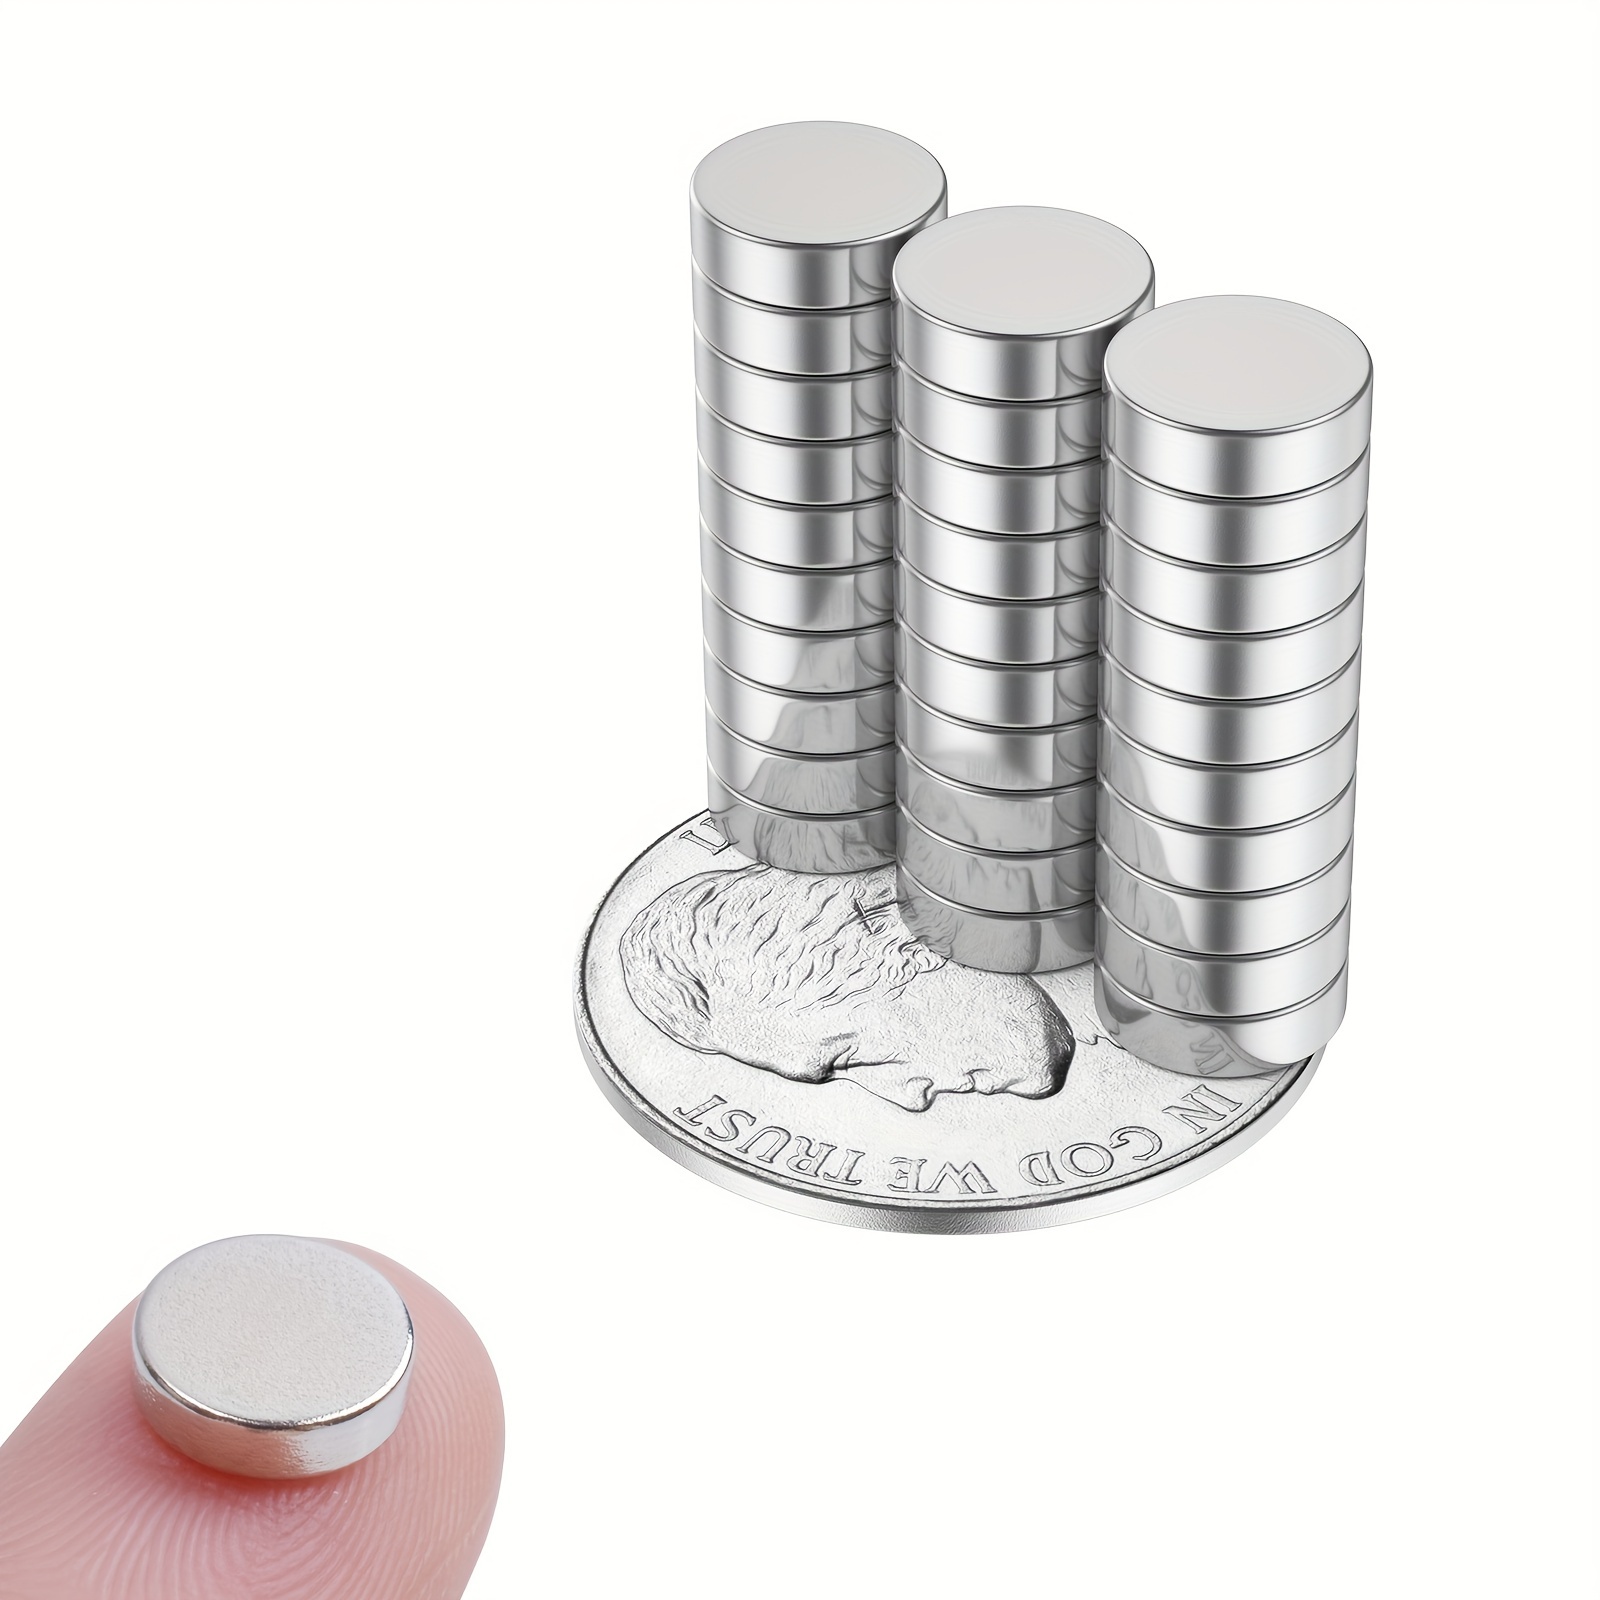 10x3mm Small Round Fridge Magnets for Whiteboard Multi-Use Tiny Neodymium  Office Magnets for Crafts ,Refrigerator - AliExpress